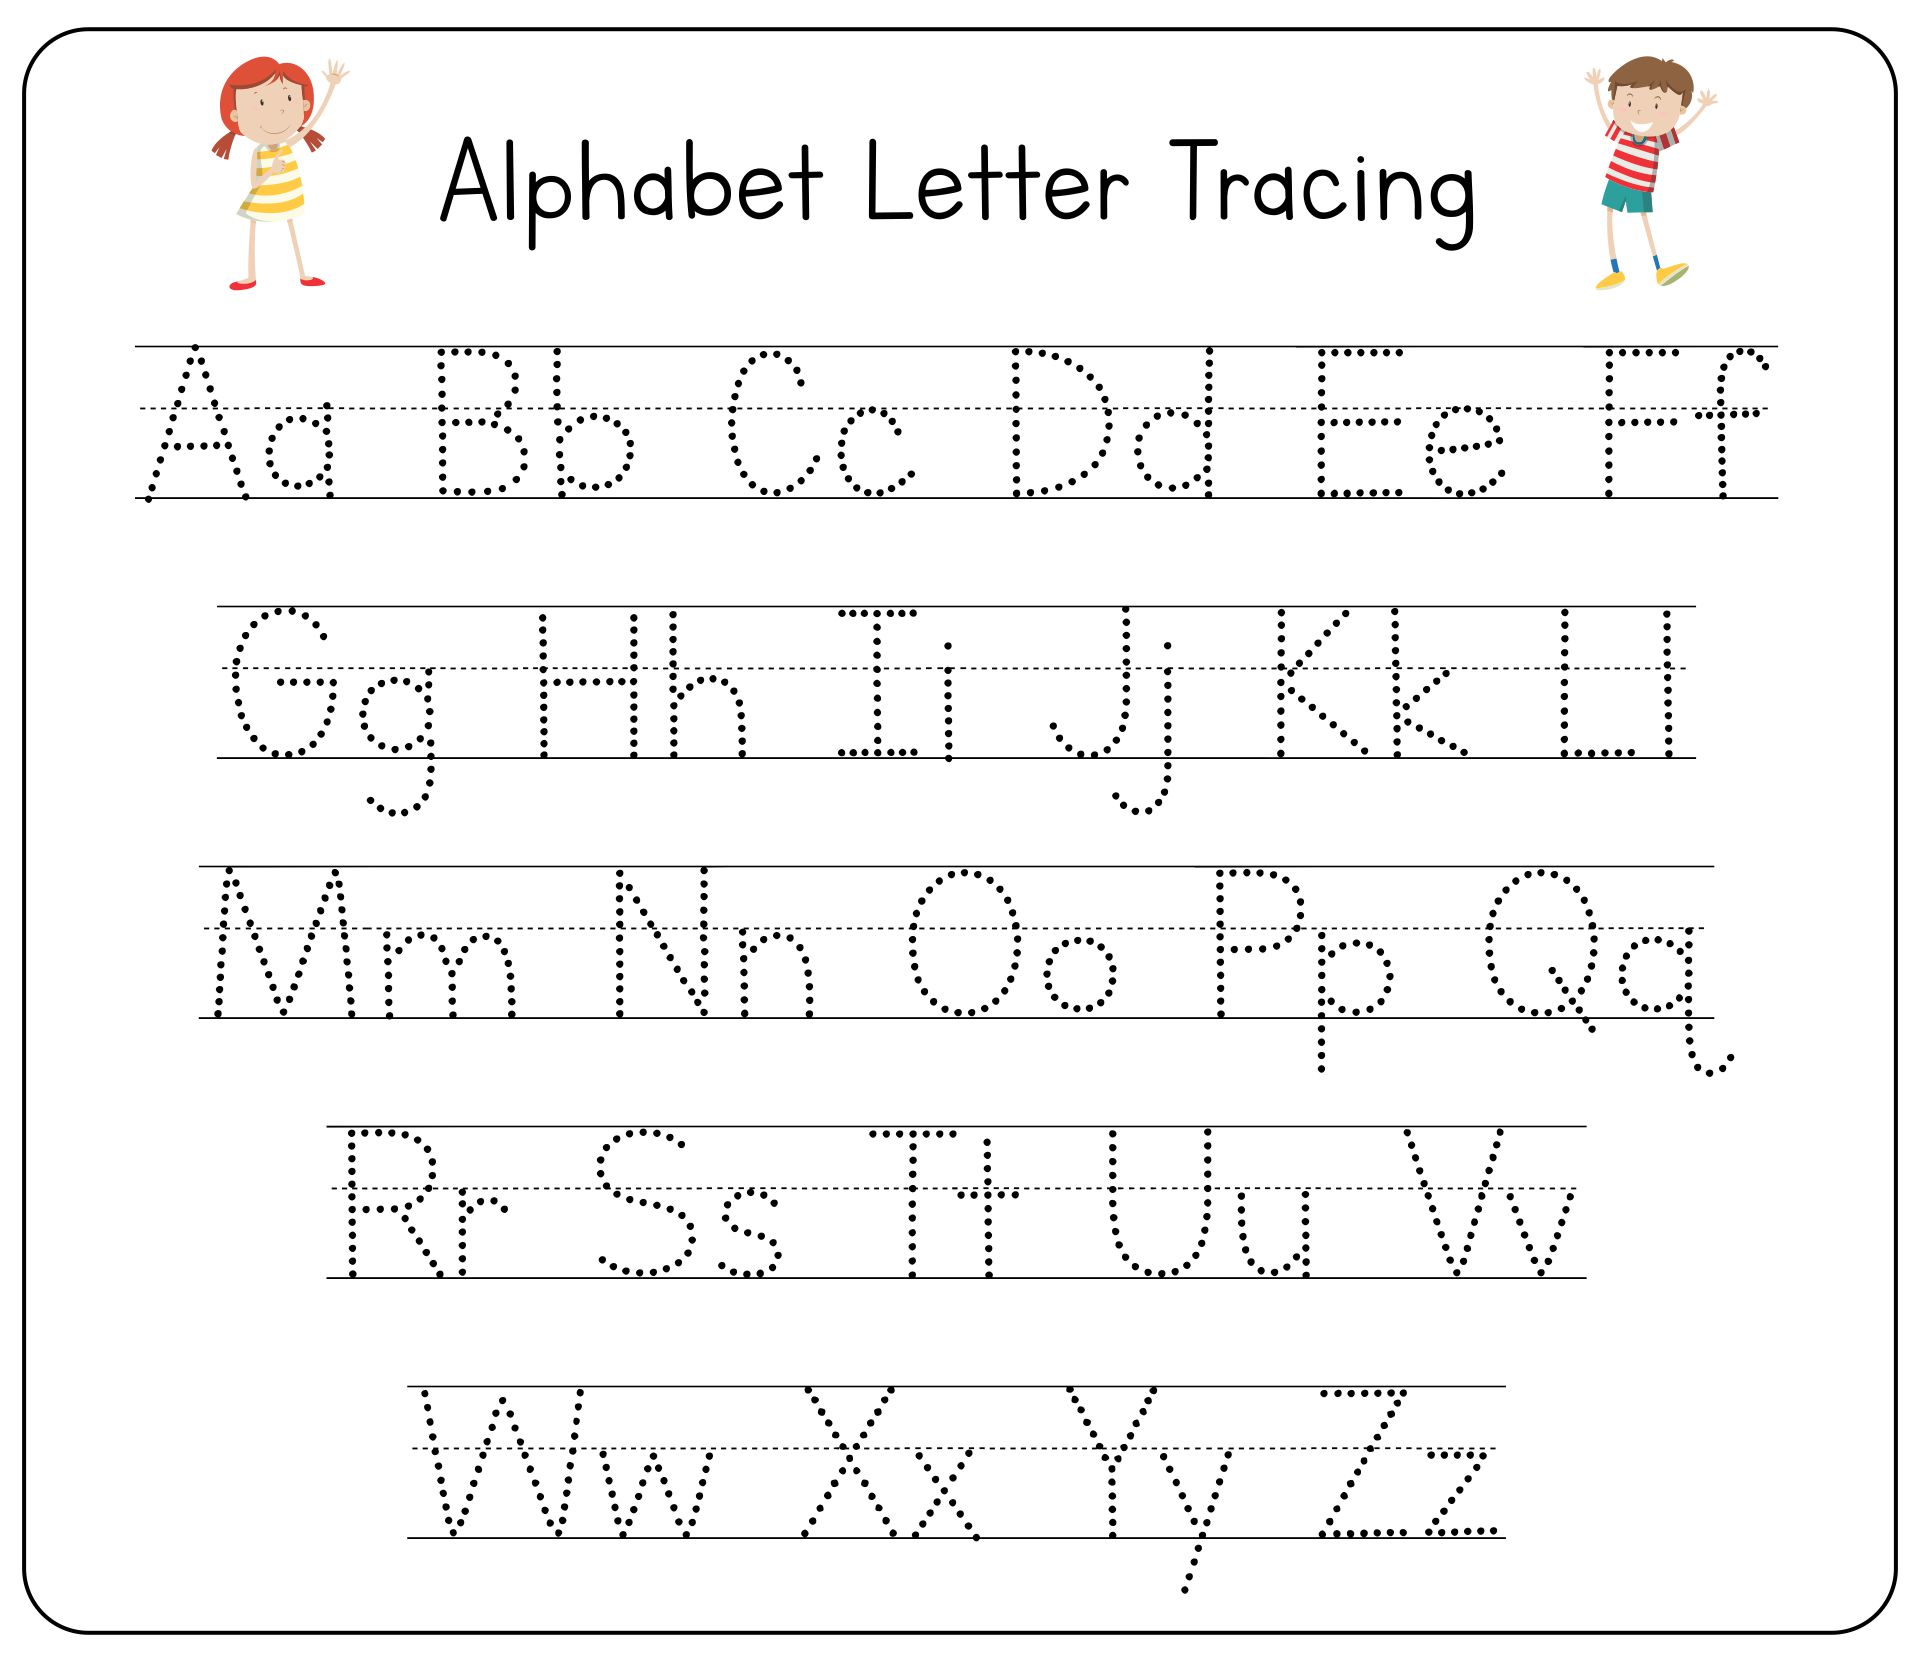 tracing-free-printable-alphabet-worksheets-printable-form-templates-and-letter